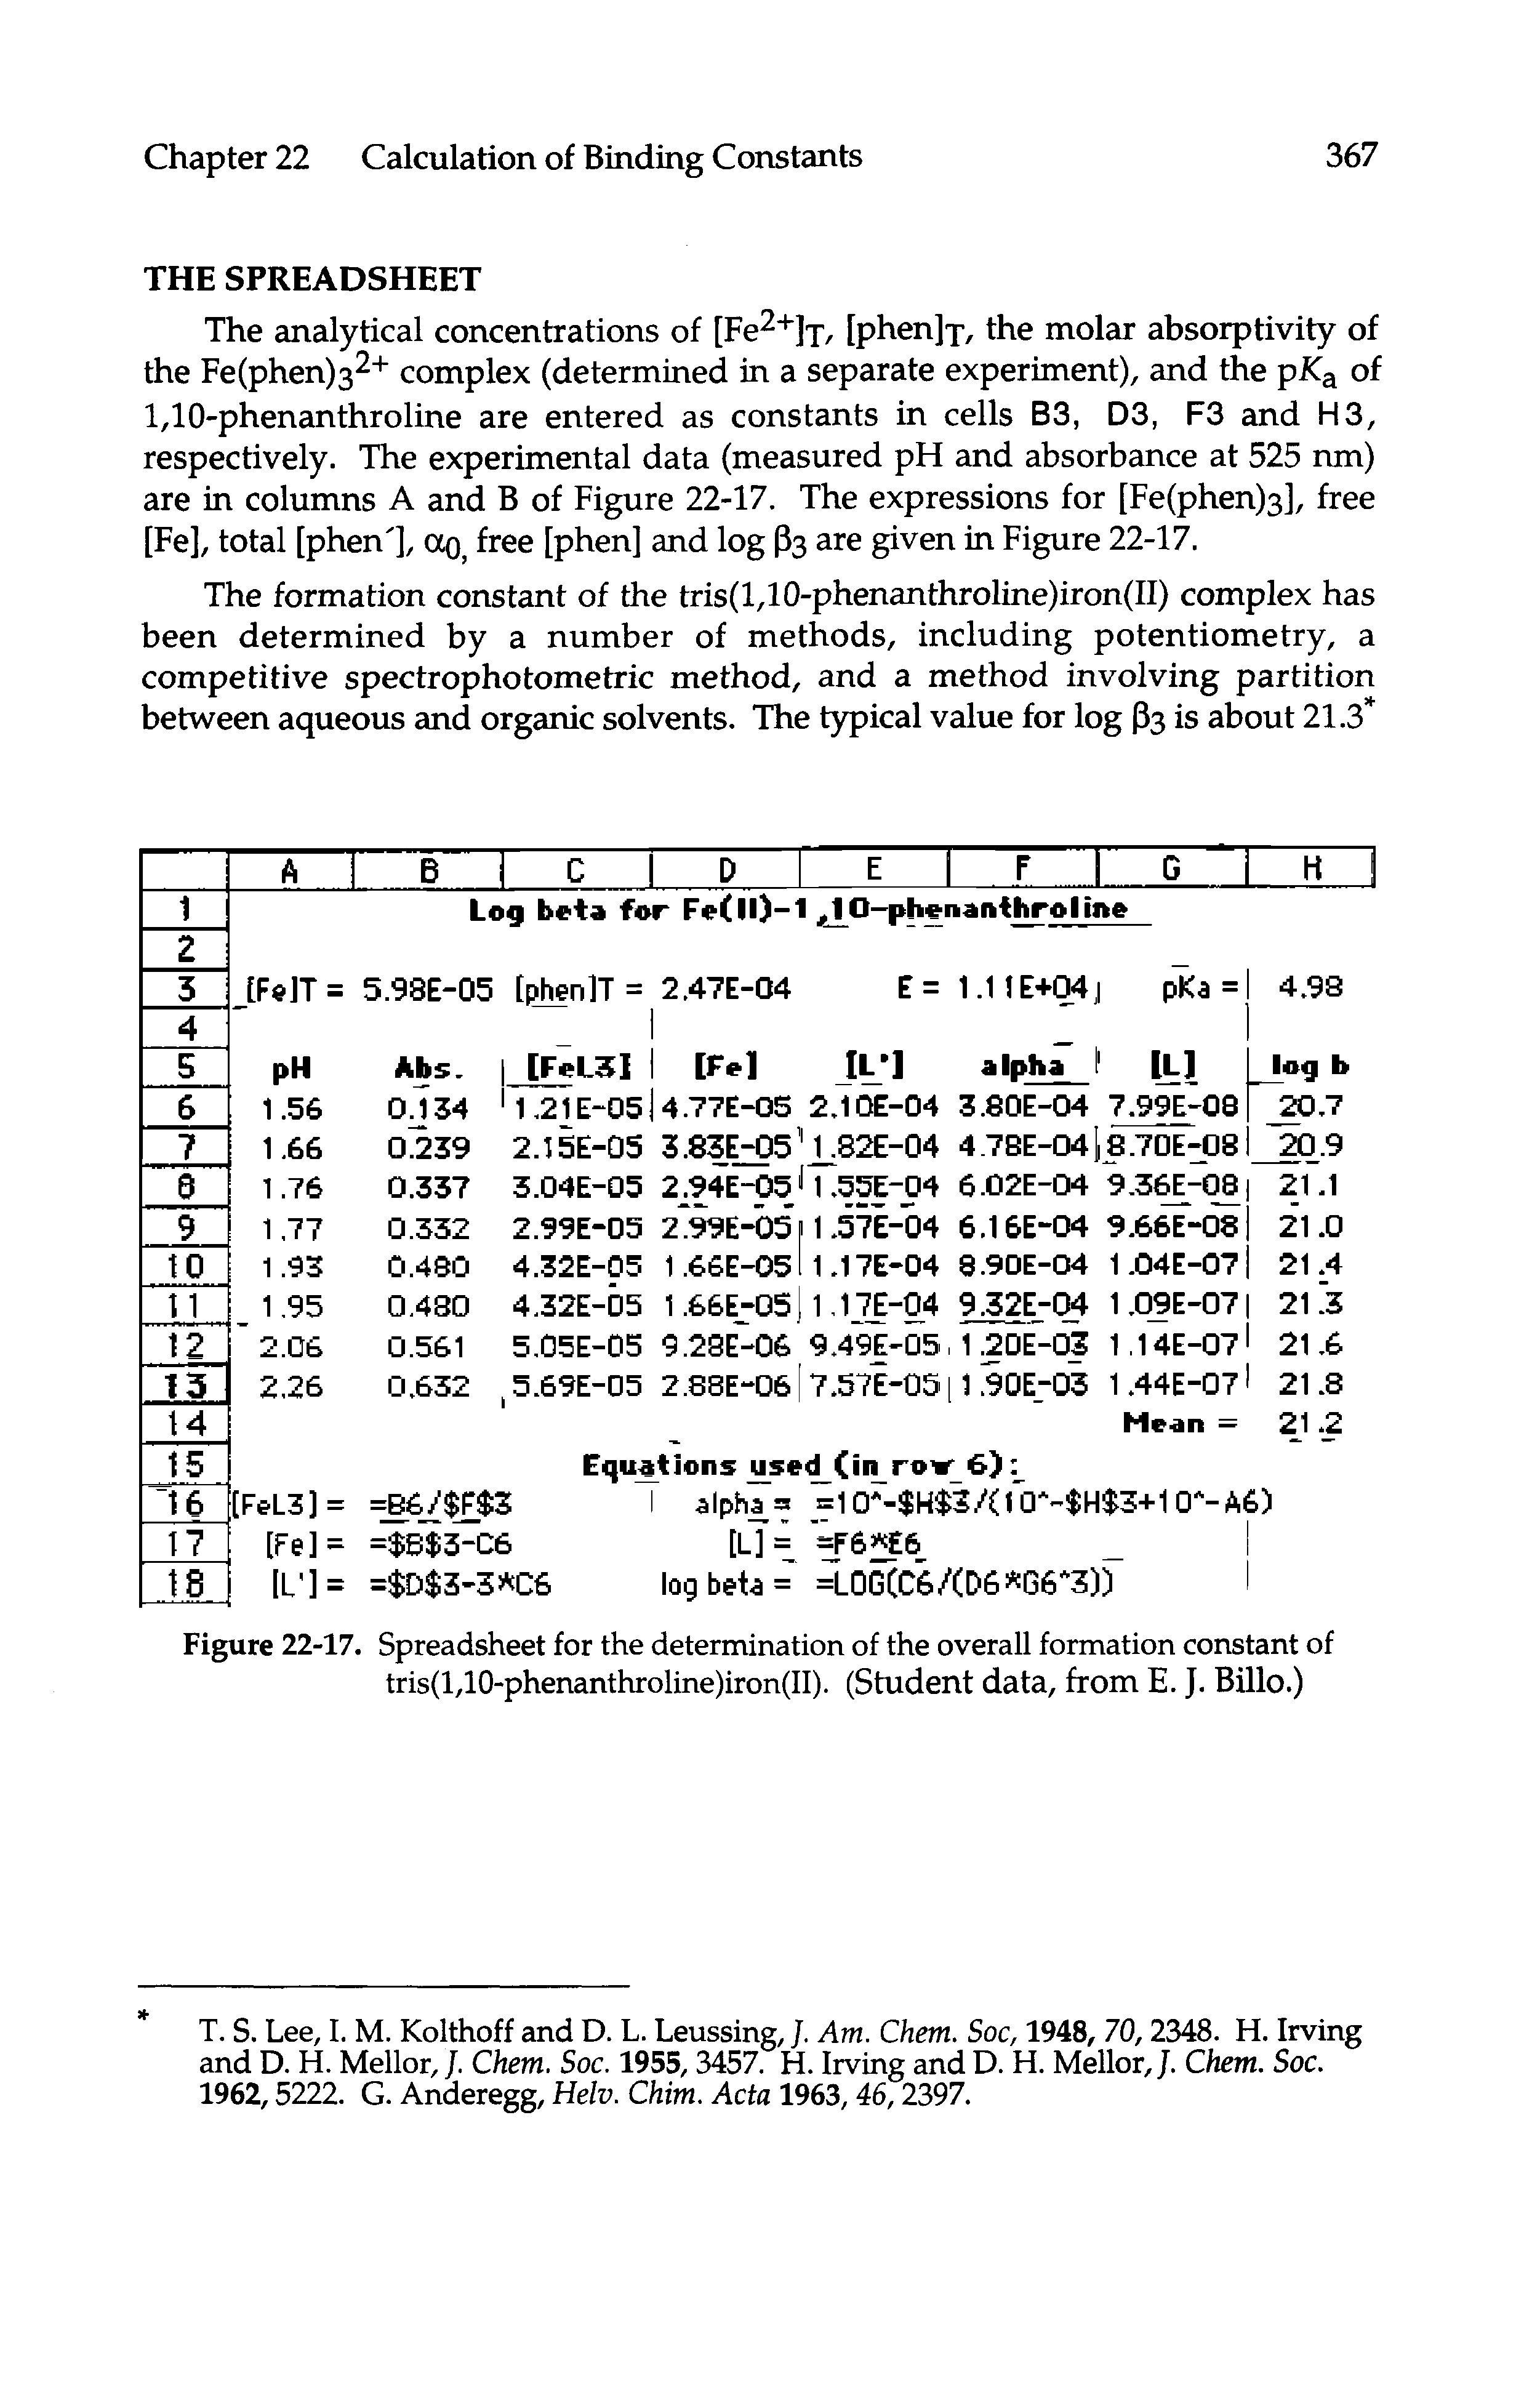 Figure 22-17. Spreadsheet for the determination of the overall formation constant of tris(l,10-phenanthroline)iron(II). (Student data, from E. J. Billo.)...